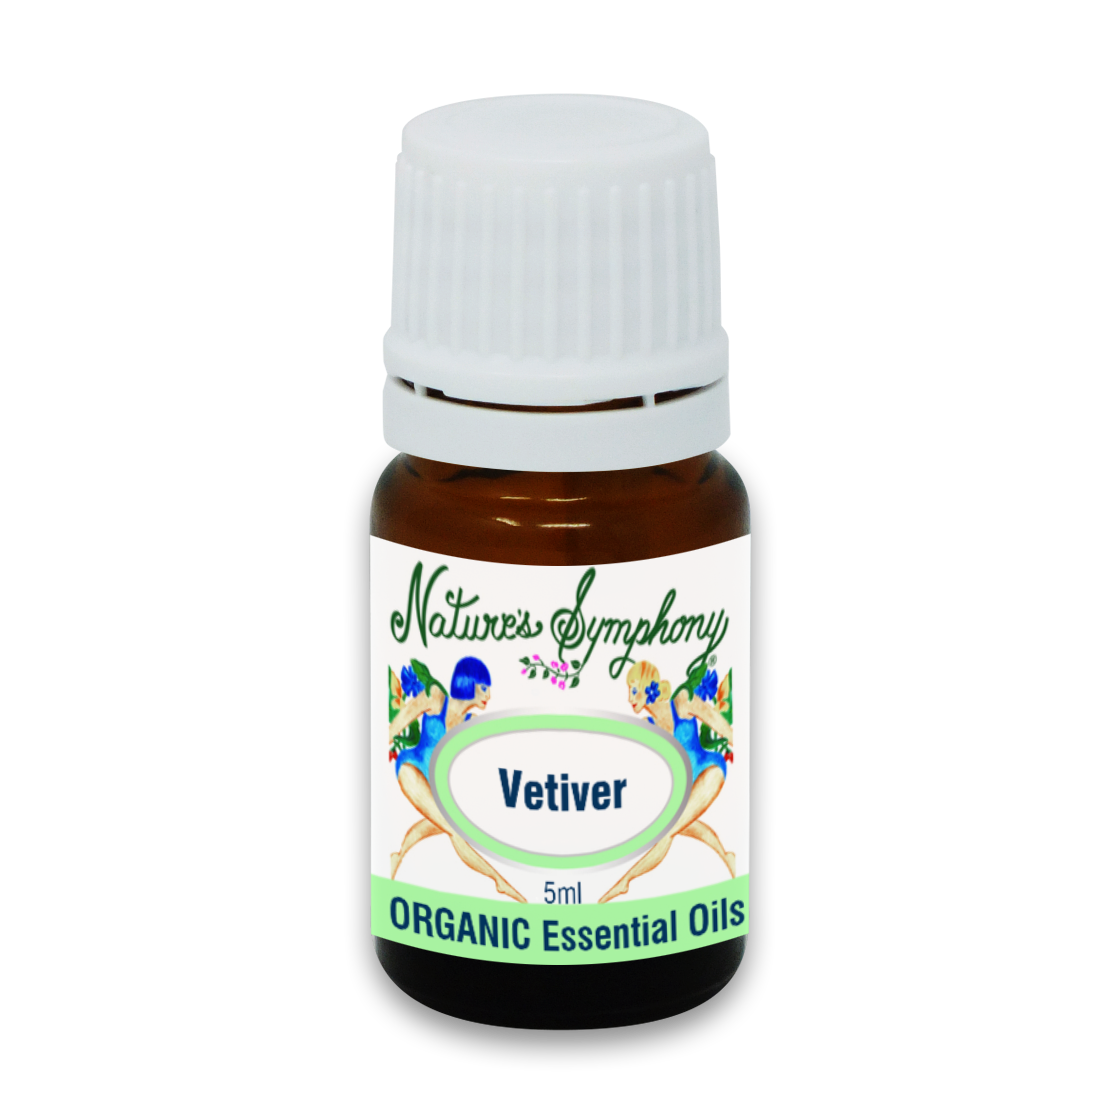 Vetiver, Organic/Wildcrafted oil - 5ml